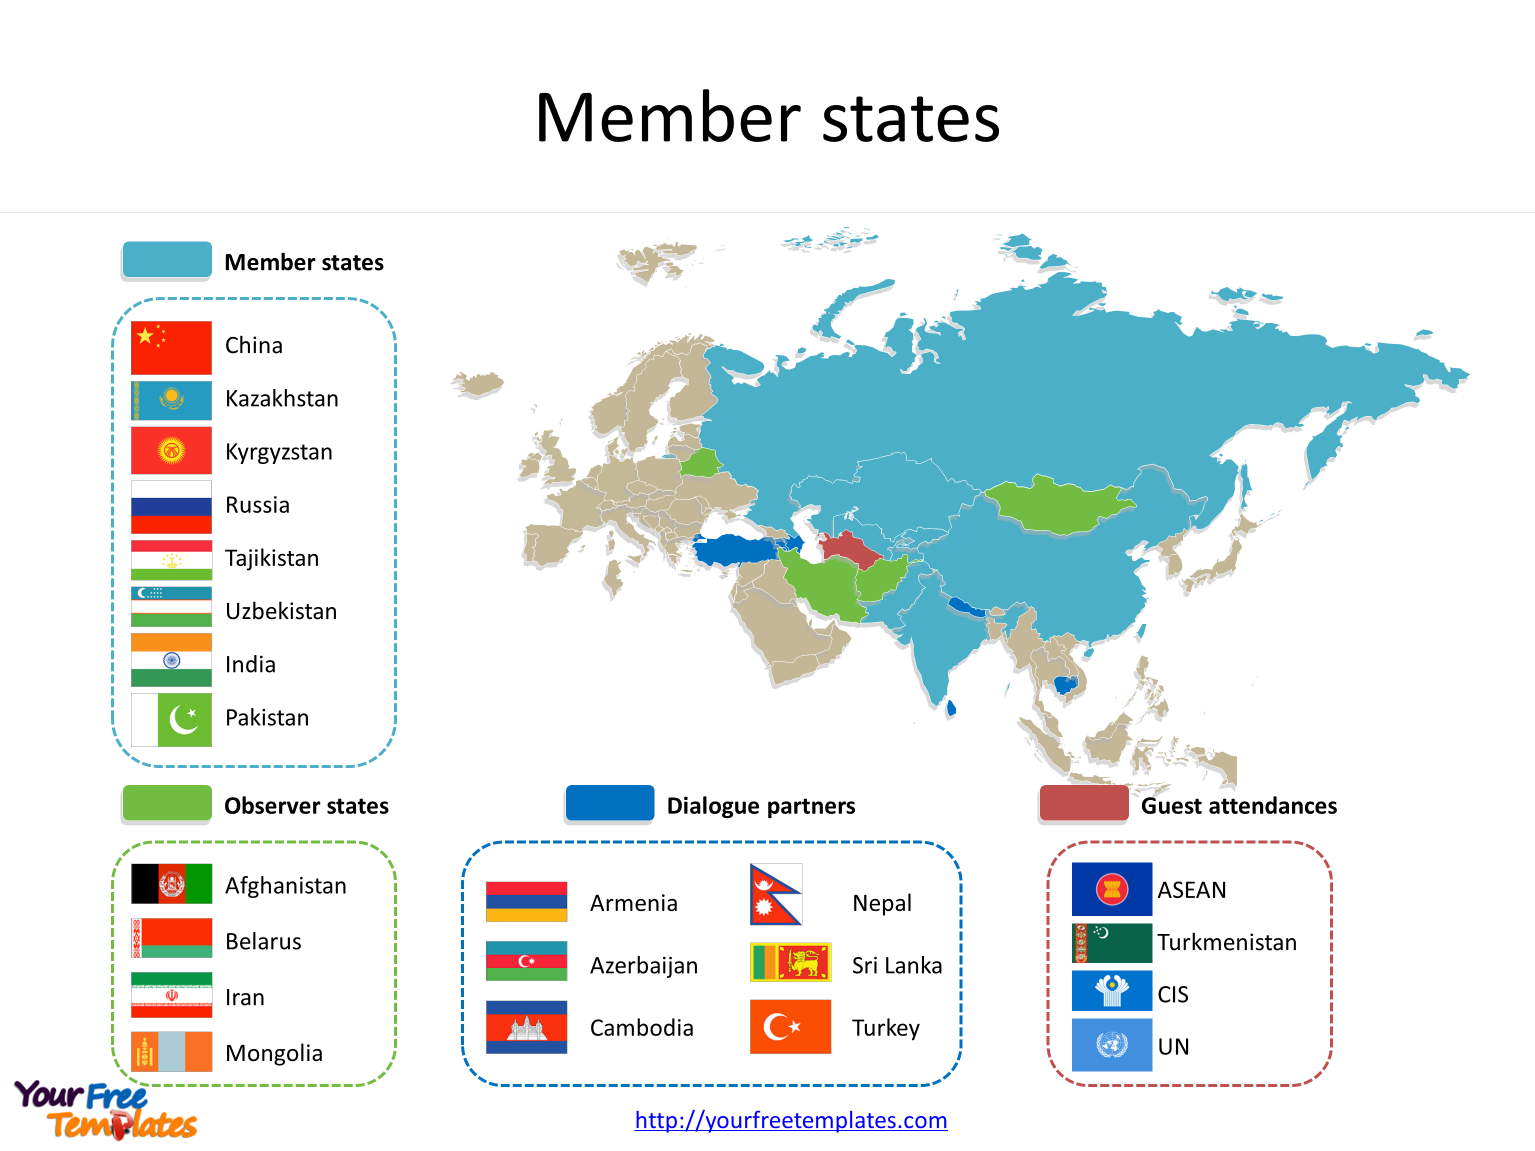 Shanghai Cooperation Organization (SCO) with four Memberships.